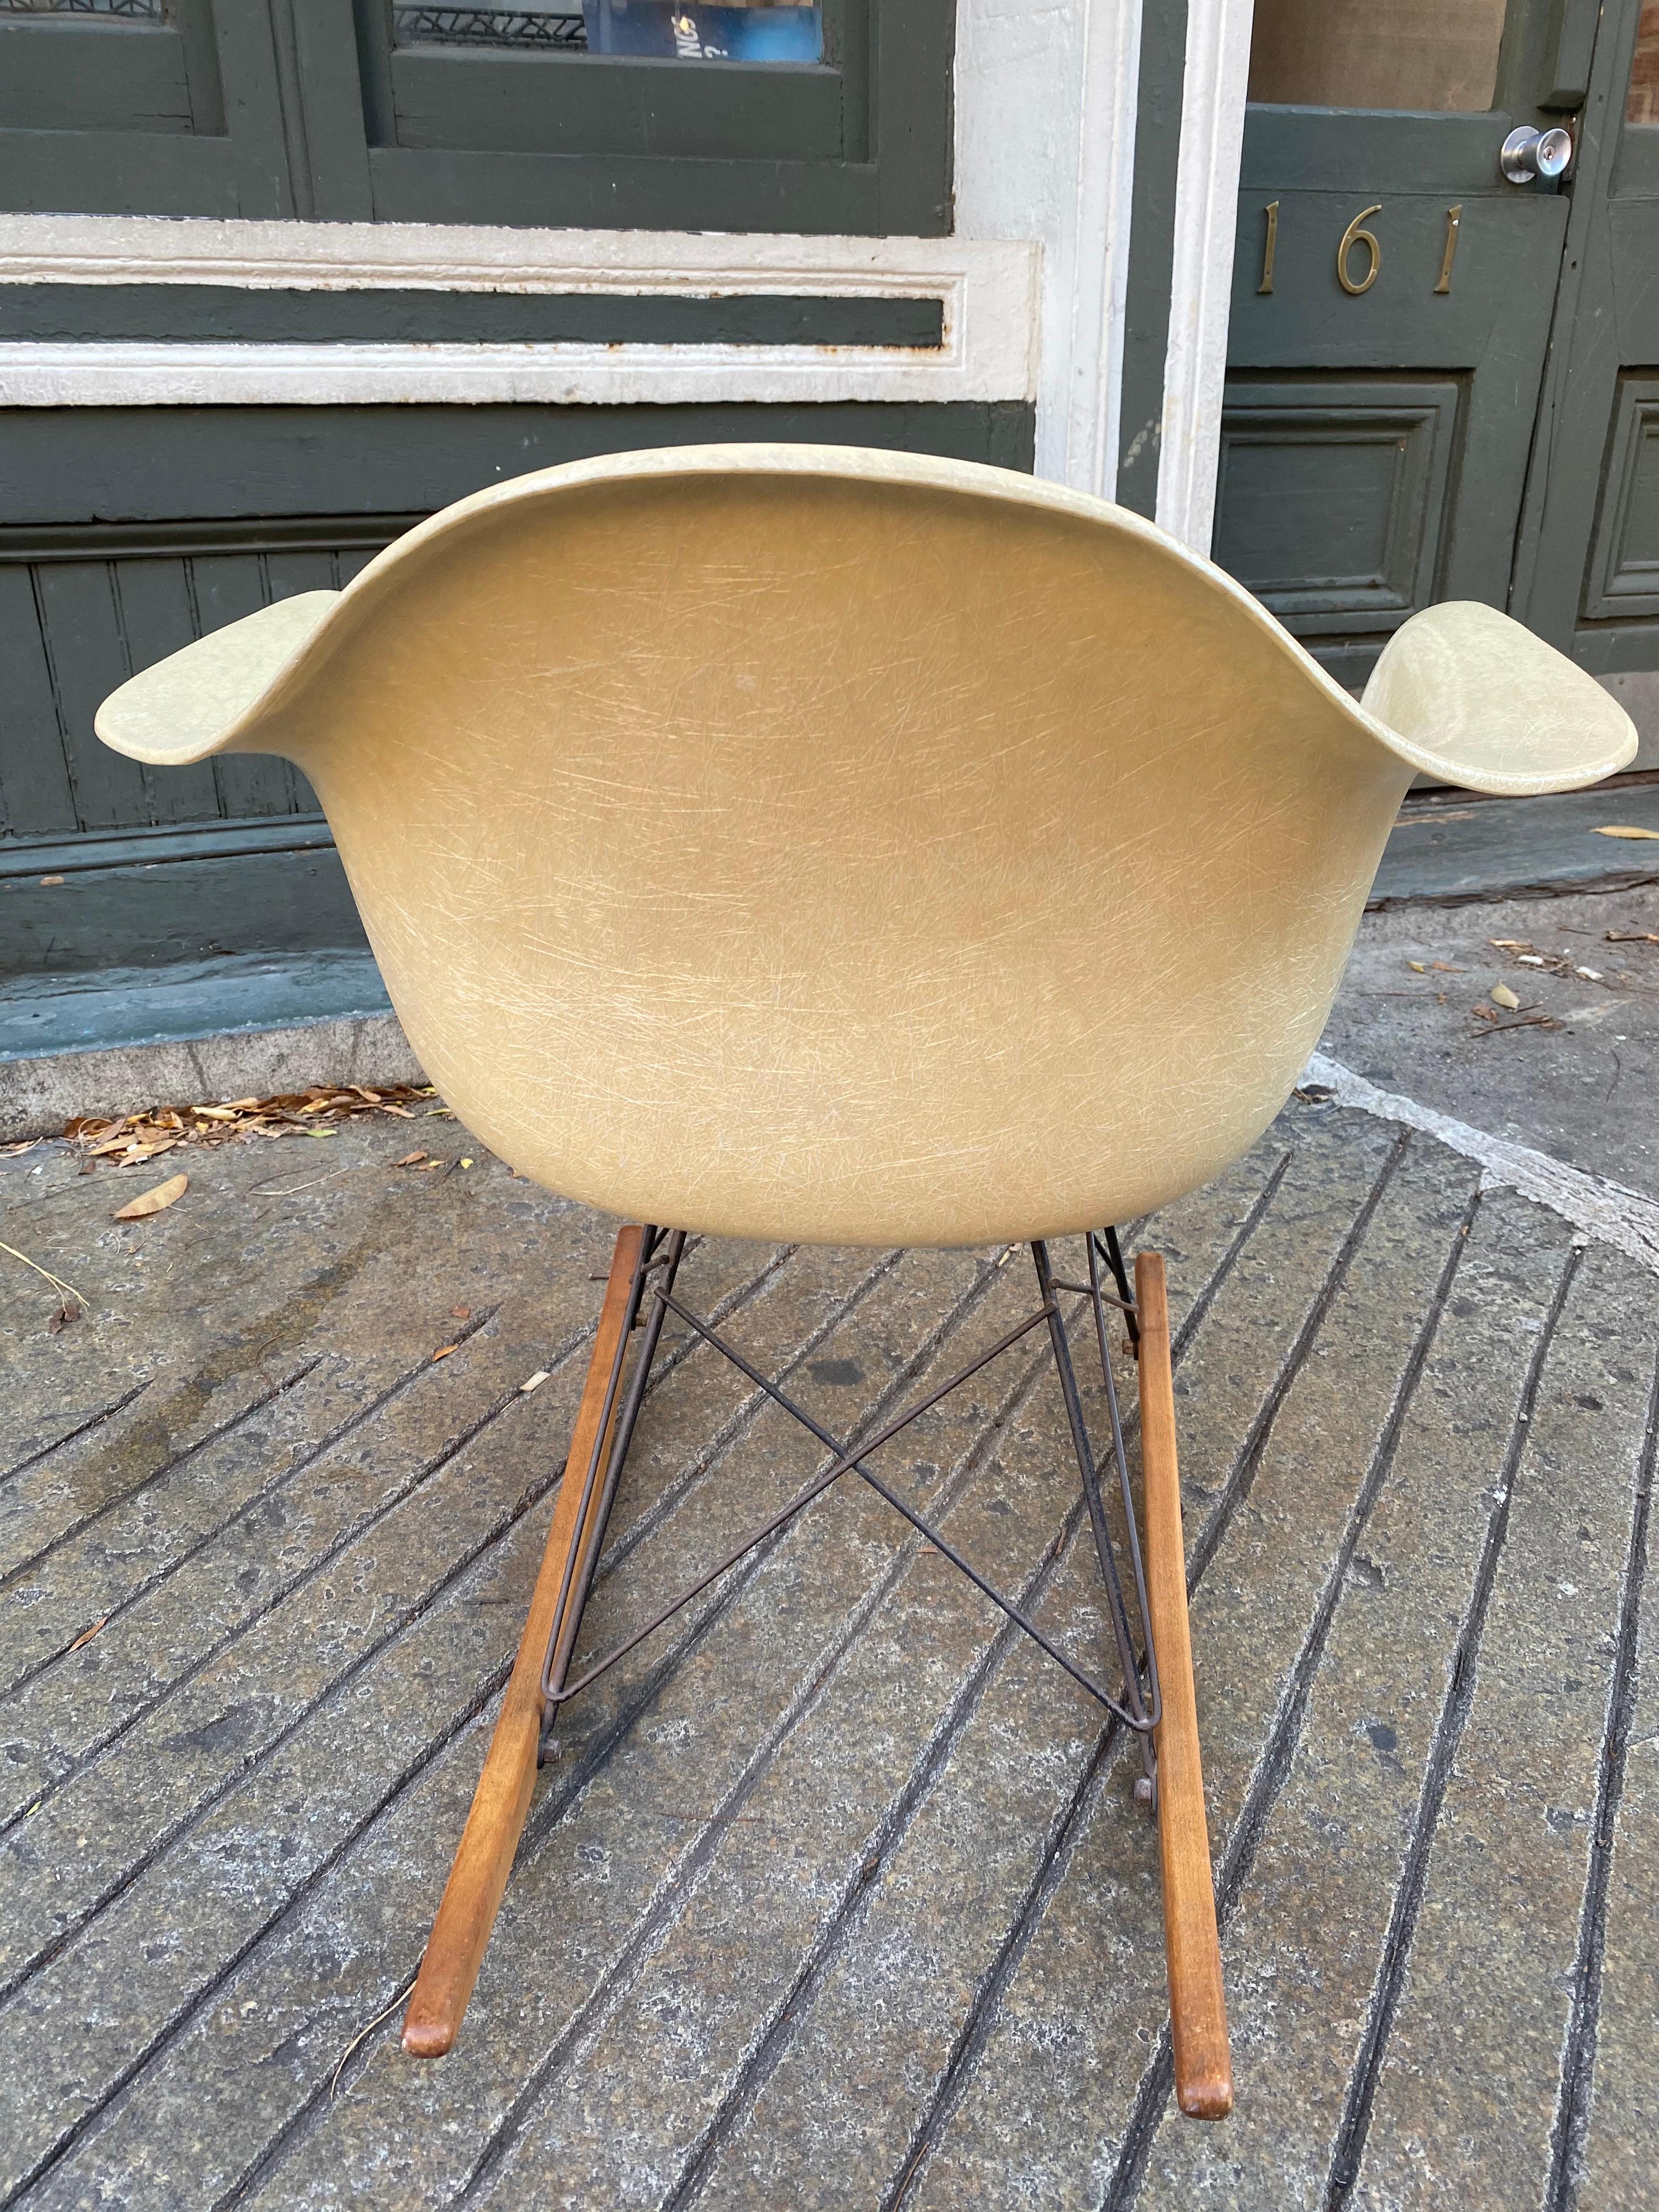 Charles and Ray Eames 2nd generation rar rocker. Very clean example! Bought from the original owners! Never out of the house, rockers always on carpet! Shell shows nice fiber, all original bushings in good shape. You can see remnants of red Zeneth